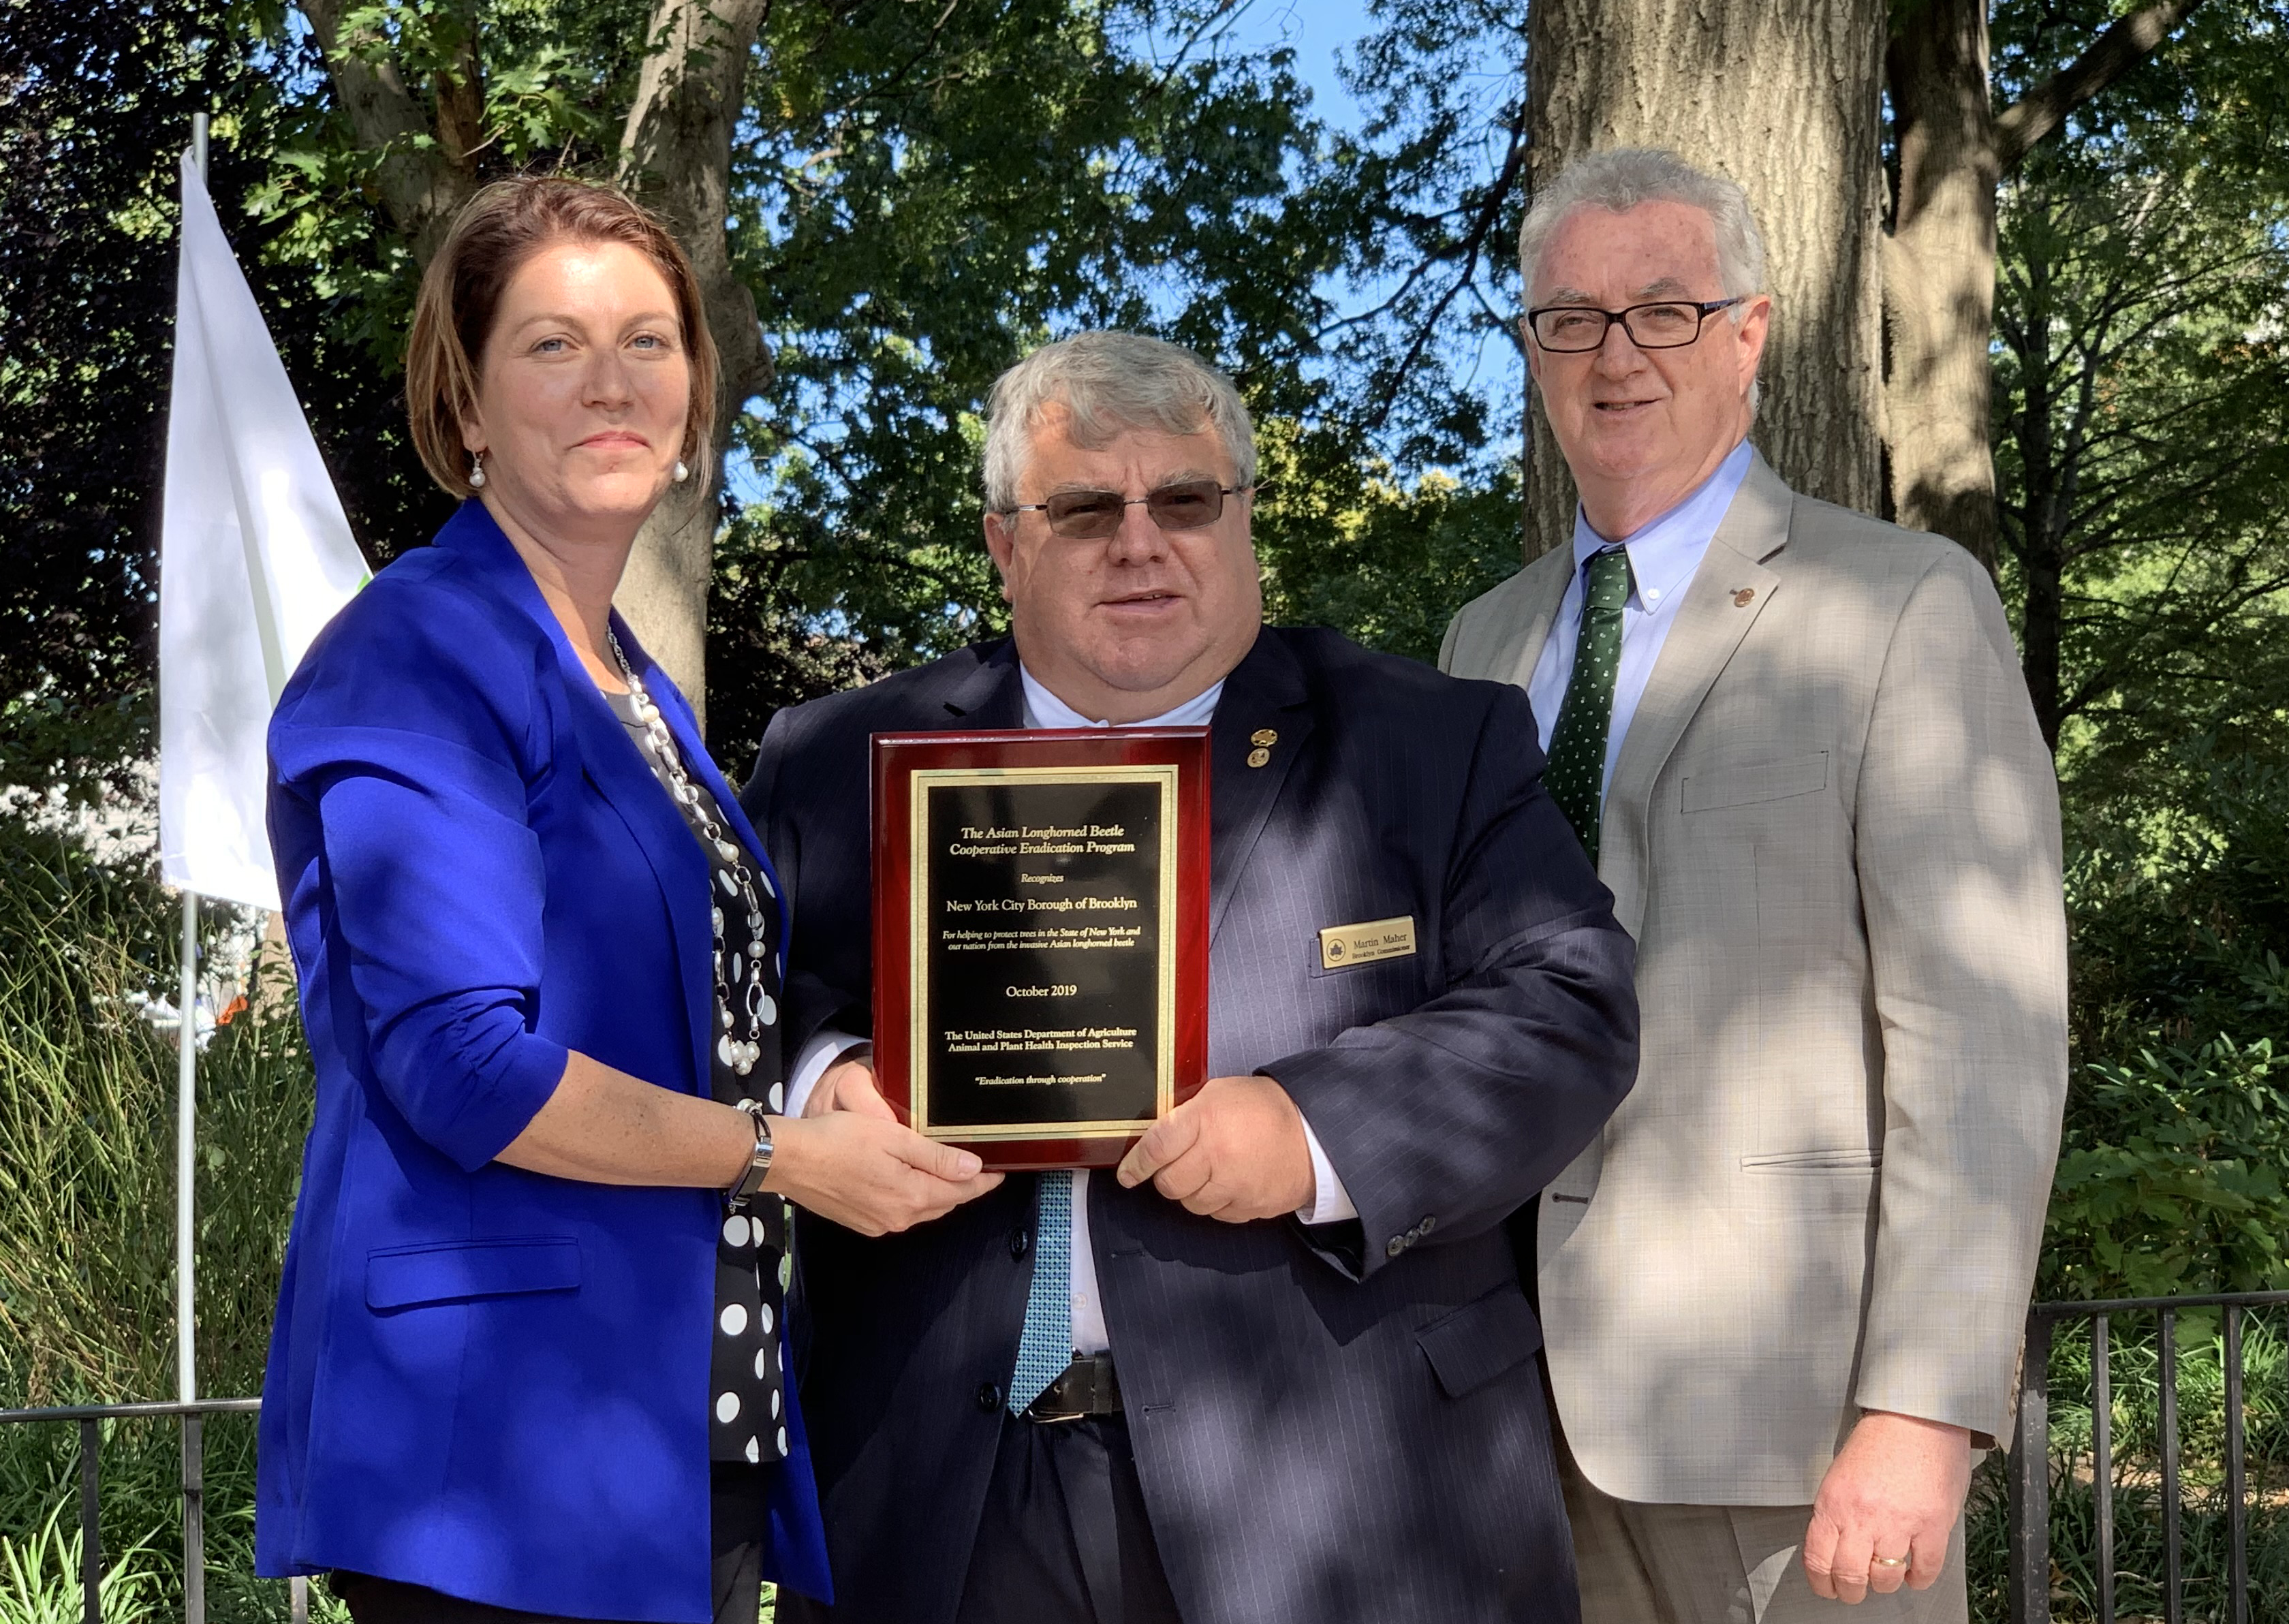 Brooklyn Parks Commissioner Marty Maher, center, accepts a plaque celebrating Brooklyn’s eradication of the invasive pest. With him stand USDA’s Samantha Simon and NYC Parks First Deputy Commissioner Liam Kavanagh. Eagle photo by Mary Frost